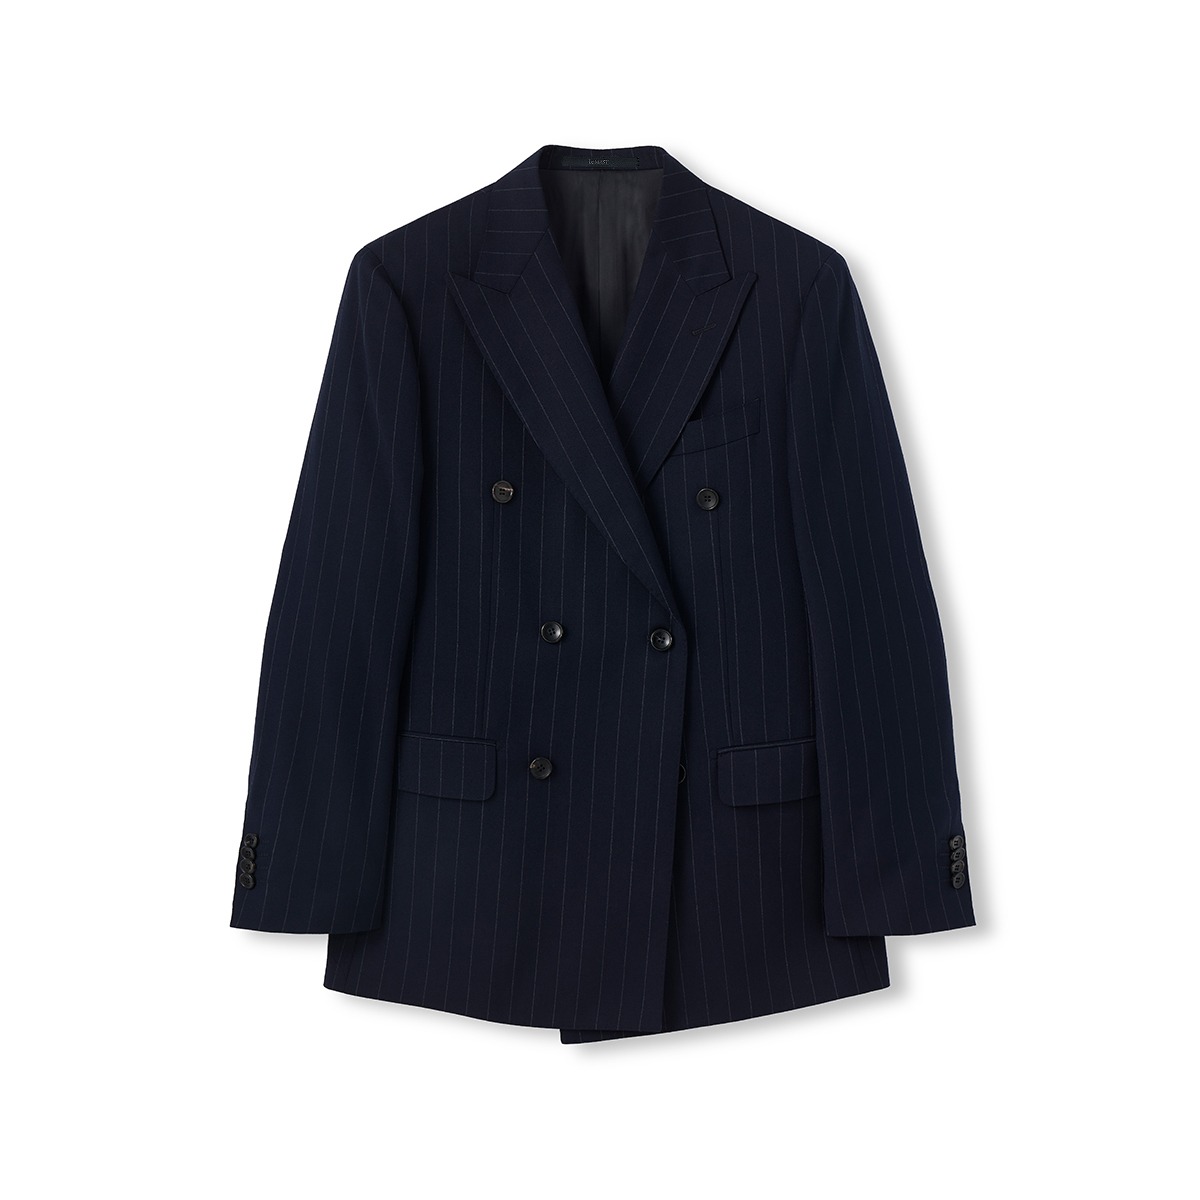 NAVY PINSTRIPED DOUBLE-BREASTED SUIT